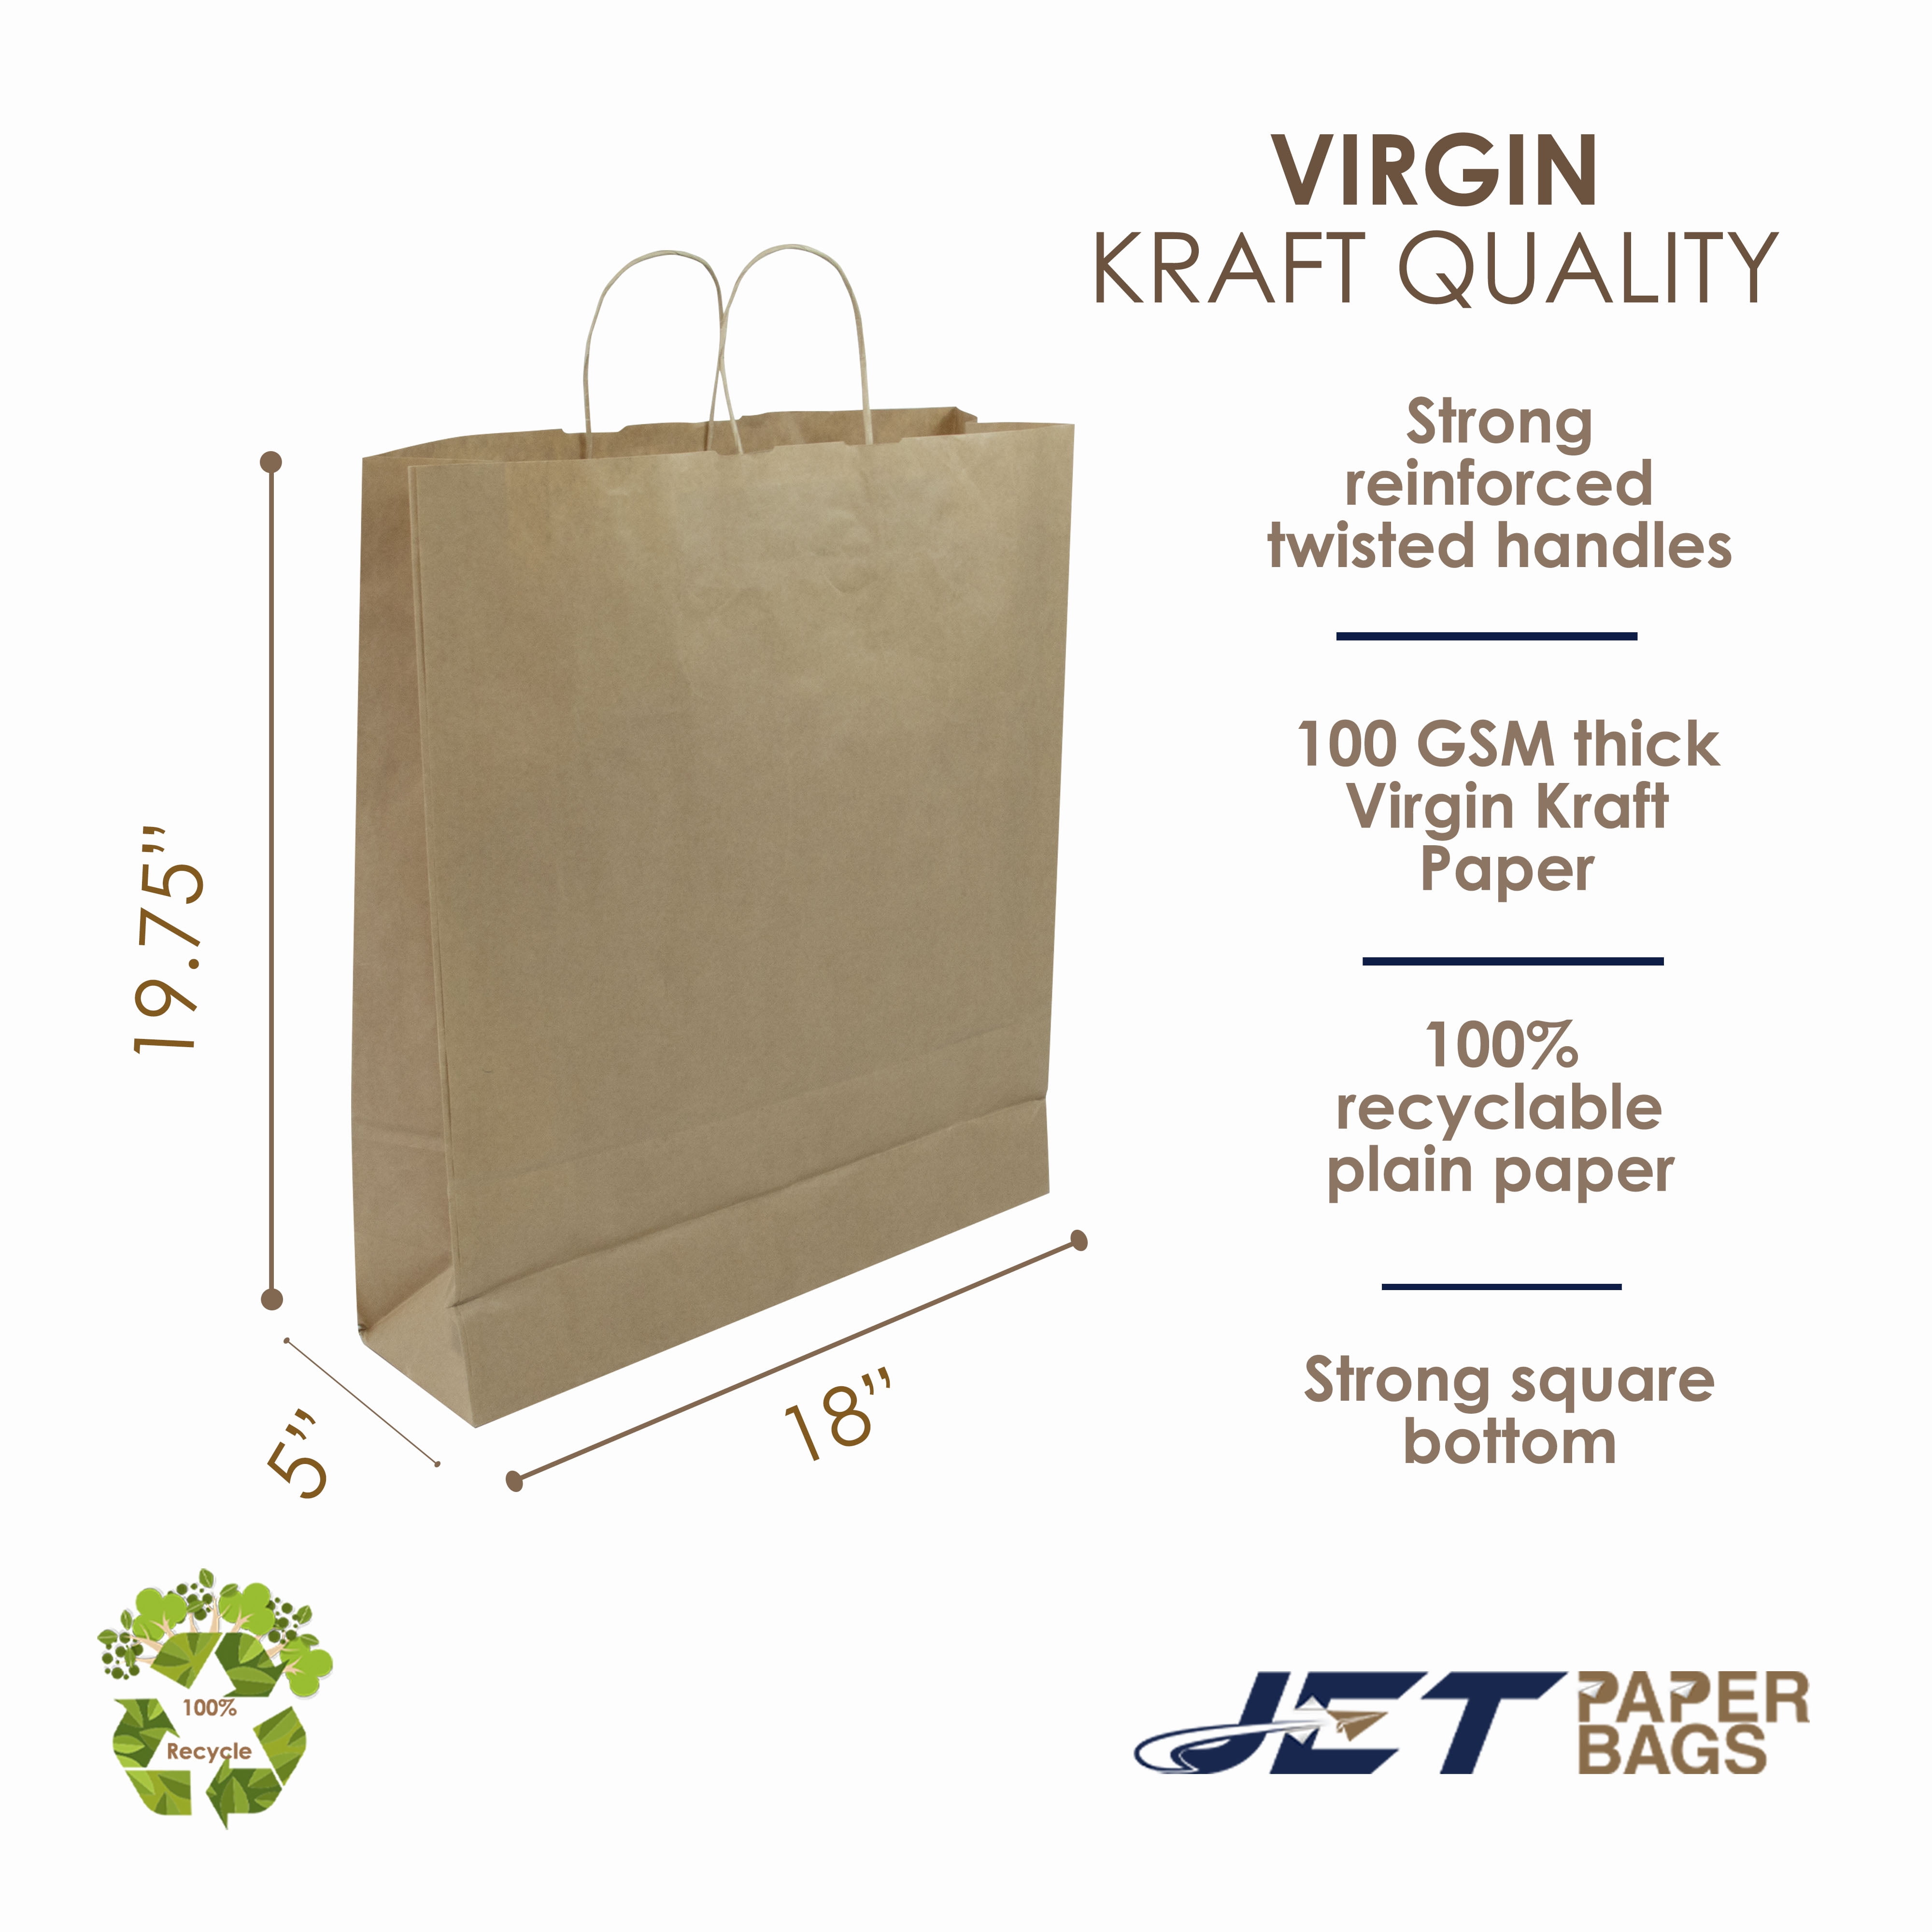 BagDream Small Paper Gift Bags 50pcs 5.25x3.75x8 Inches Kraft Paper Bags Party Bags Shopping Bags Kraft Bags White Paper Bags with Handles Bulk